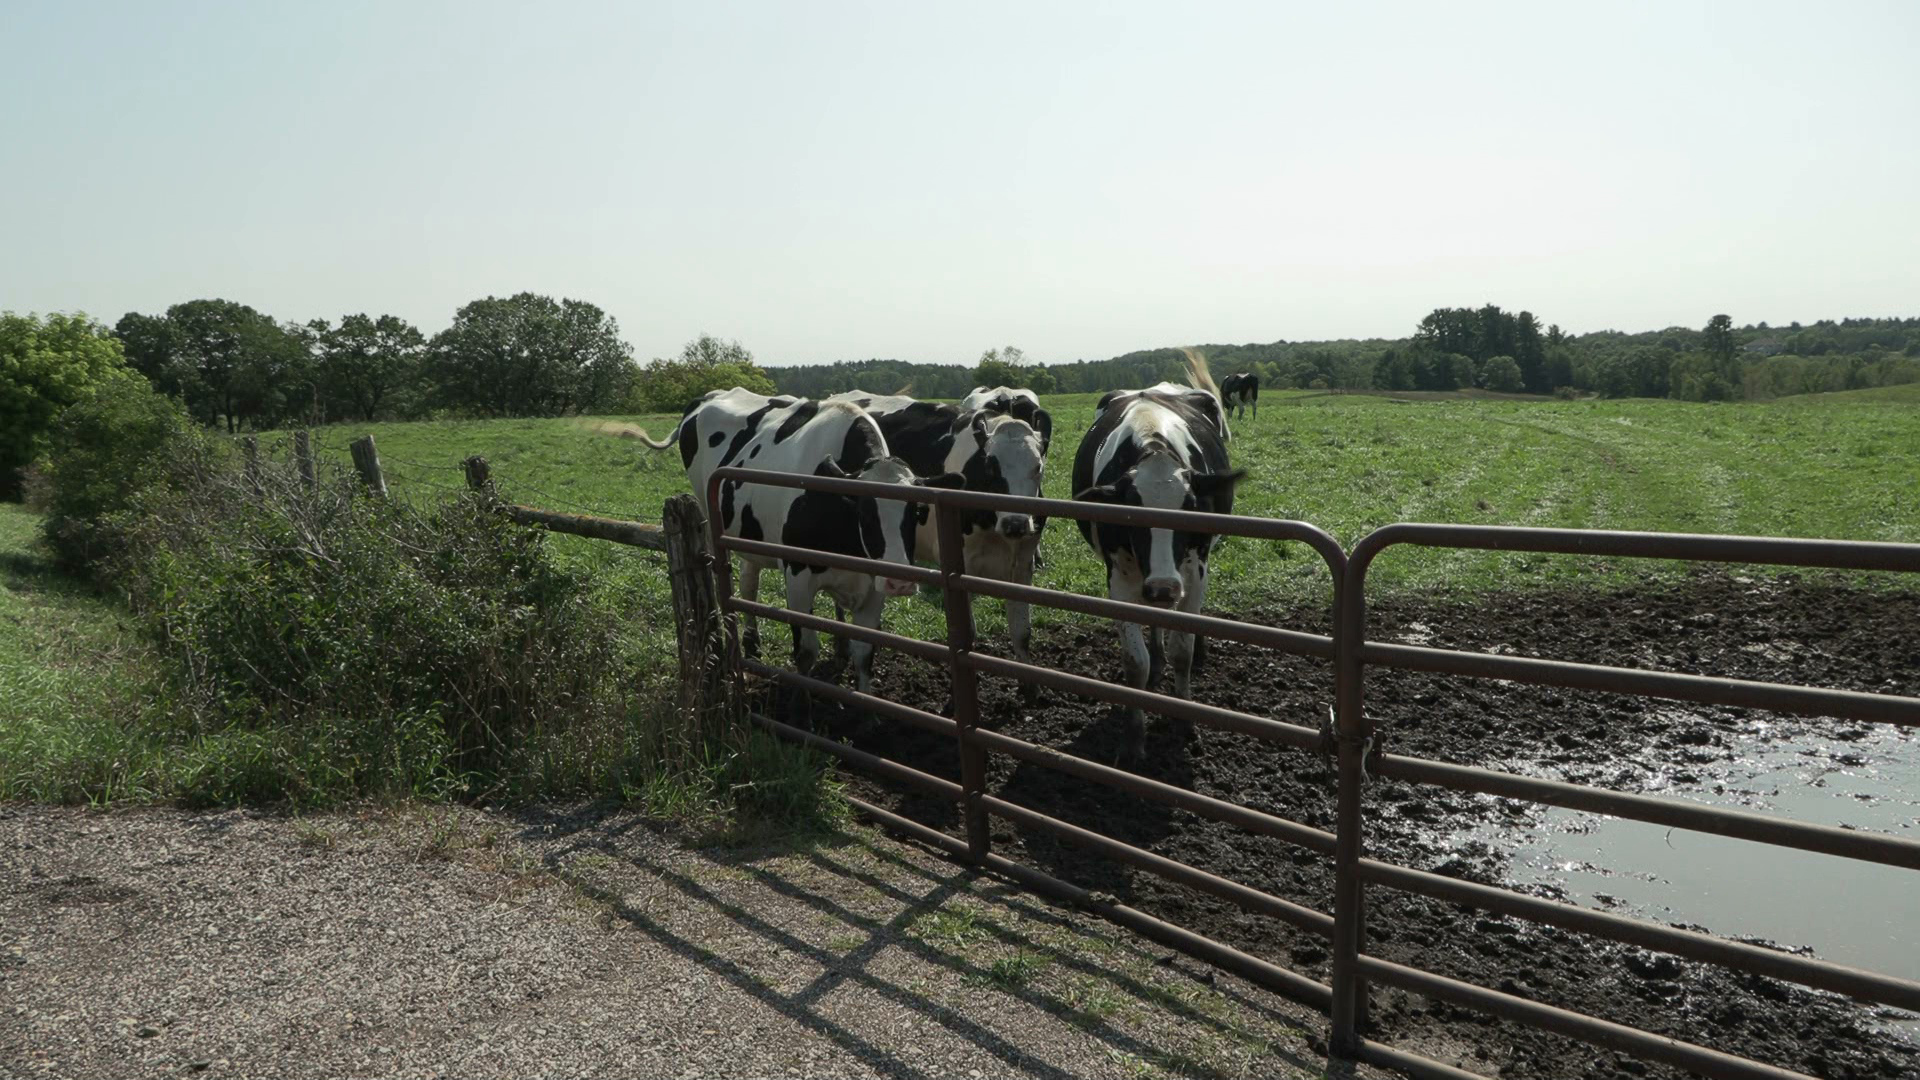 Three cows stand on the edge of a patch of mud and behind fencing, with pasture and woodland in the background.